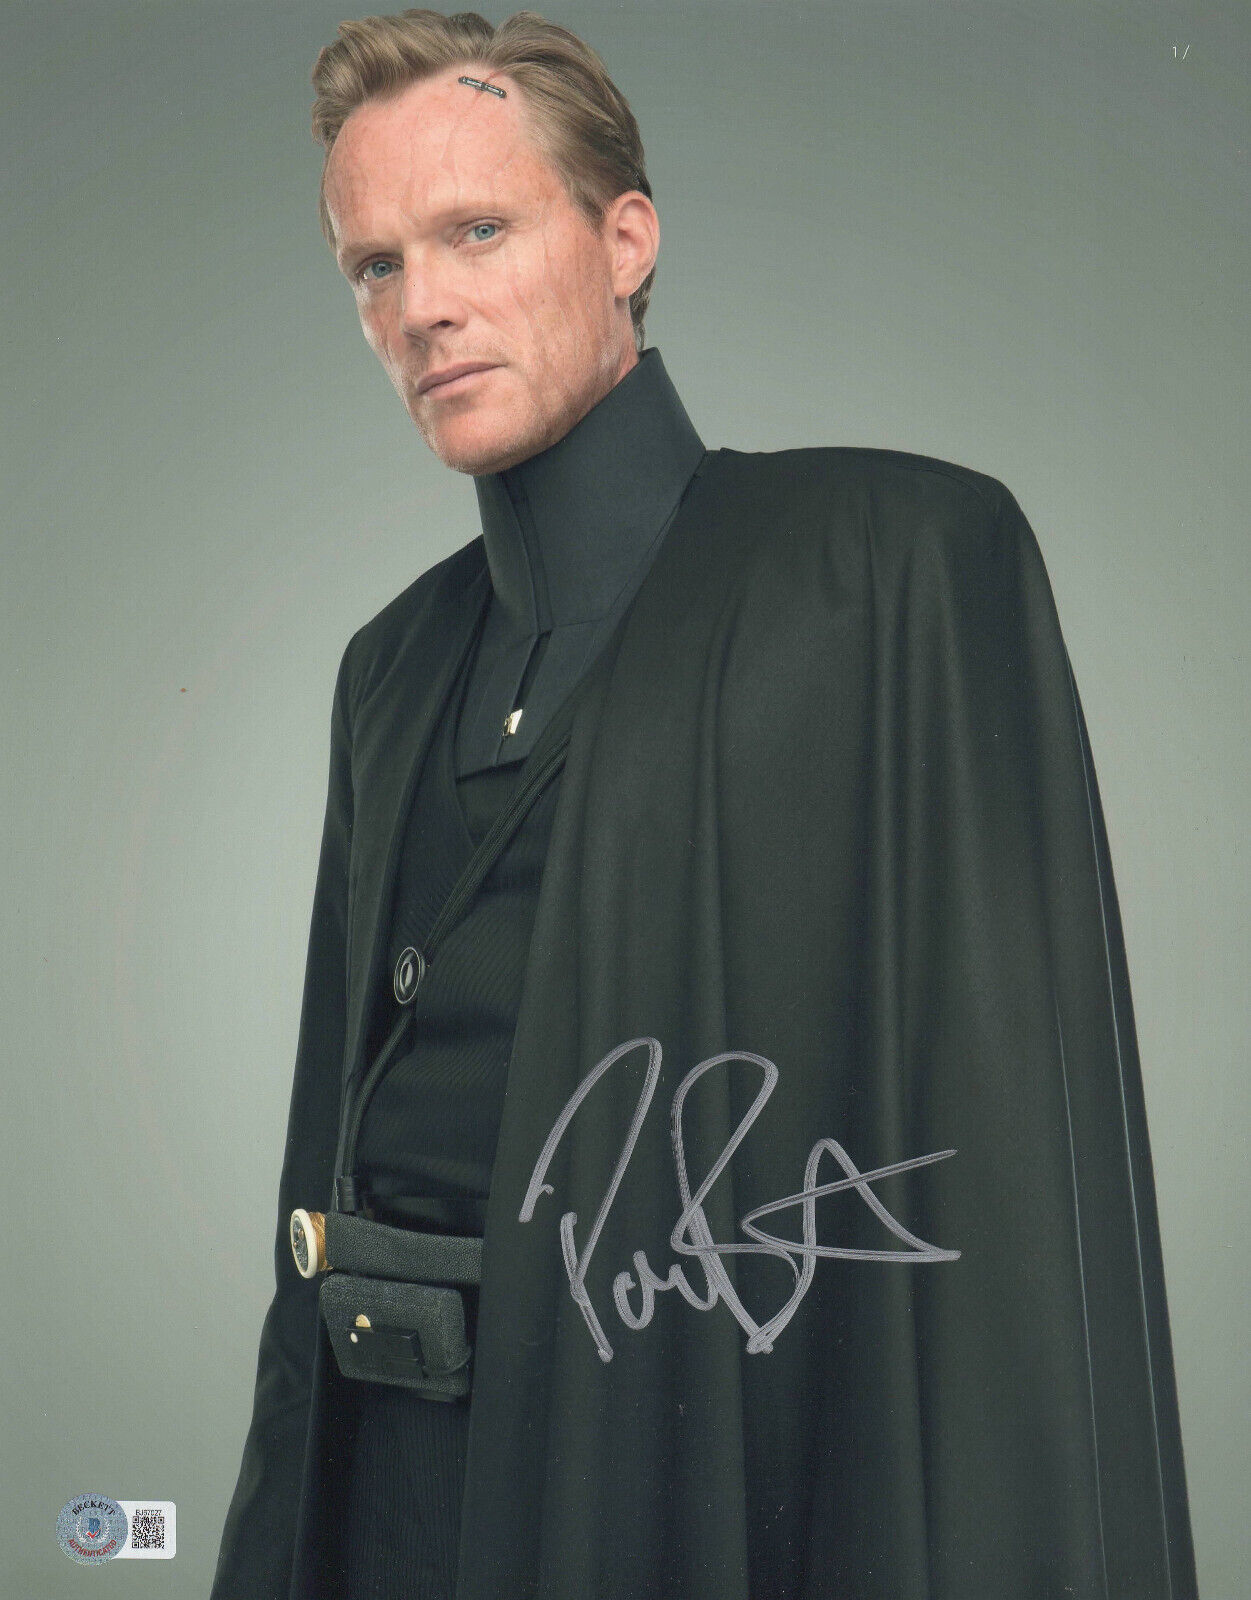 PAUL BETTANY SIGNED AUTOGRAPH  11X14 PHOTO SOLO A STAR WARS STORY BAS BECKETT